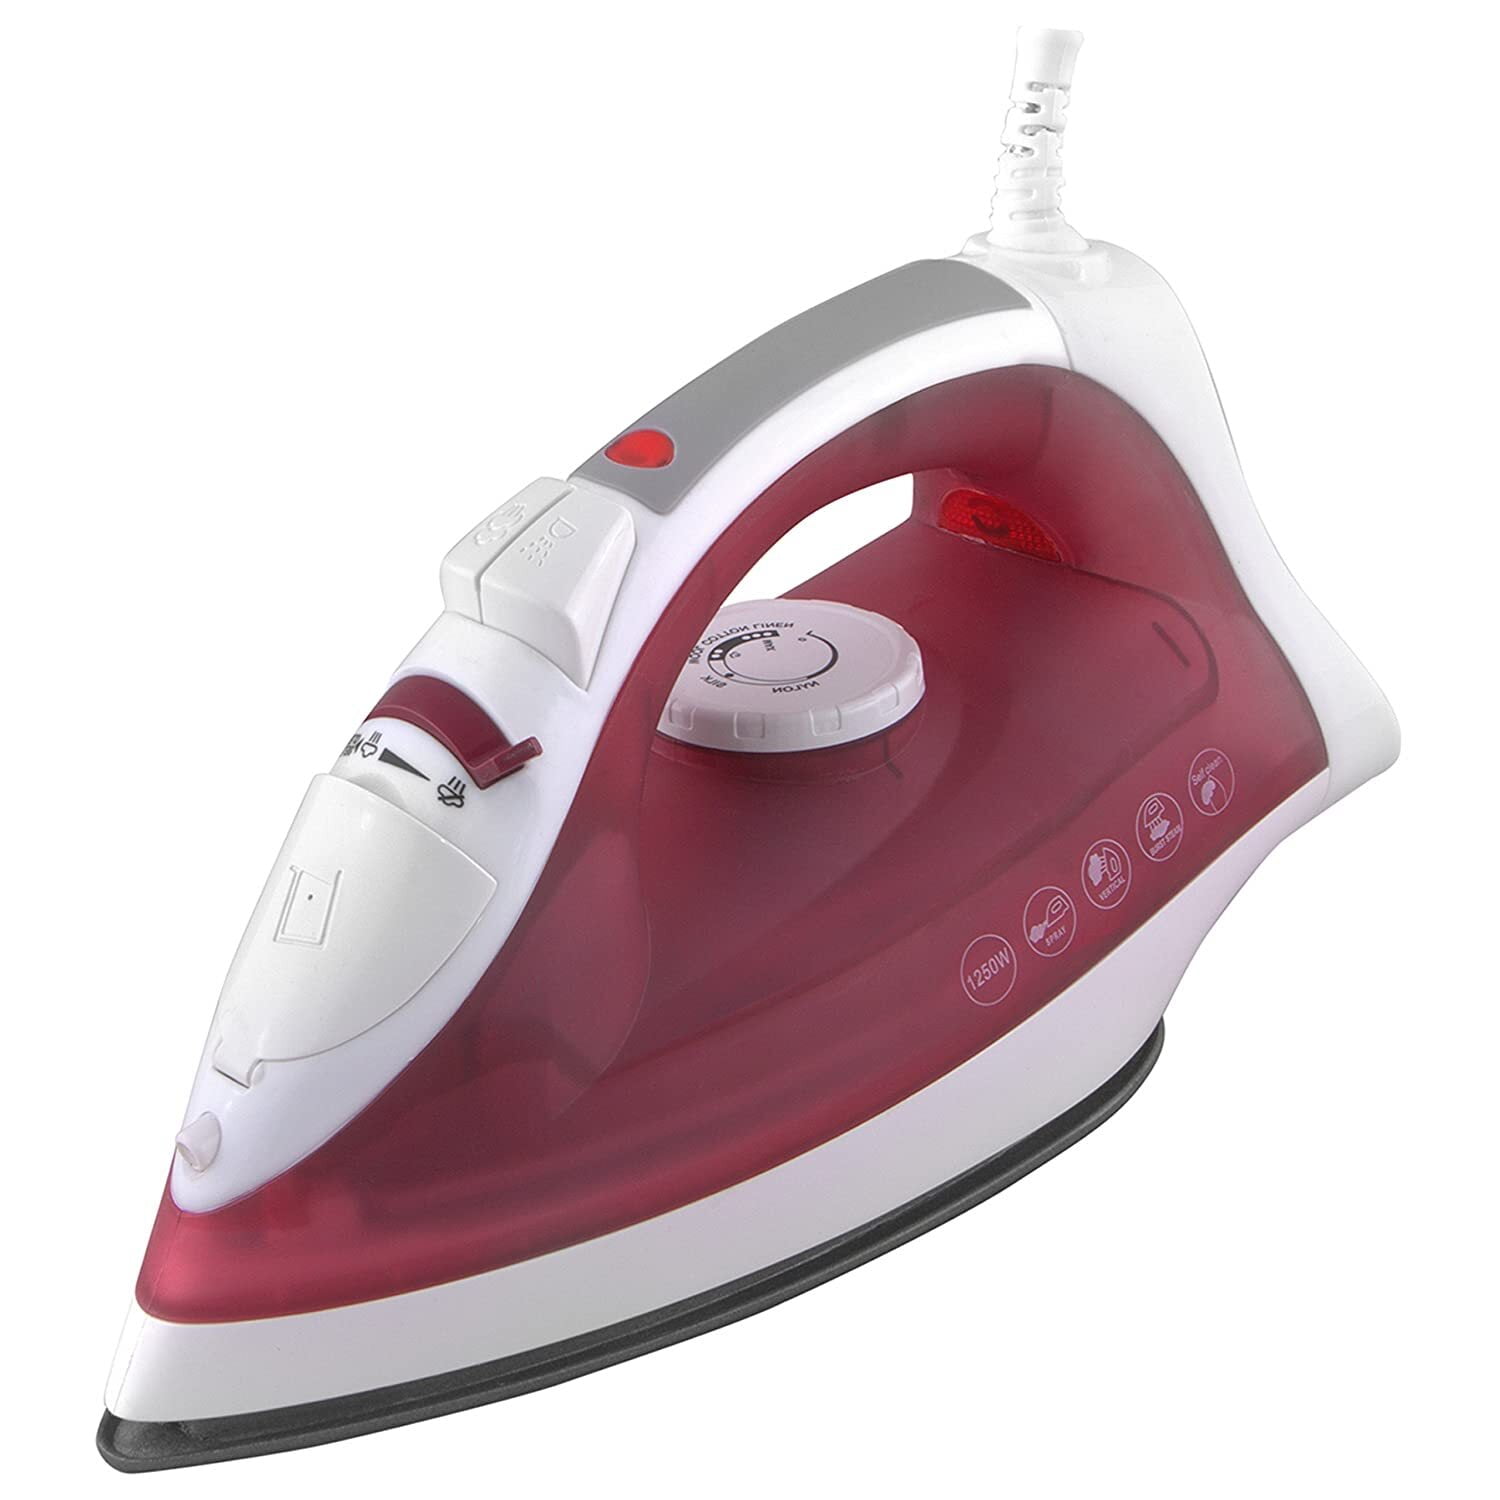 Morphy Richards Glide 1250 Watts Steam Iron On Dillimall.Com